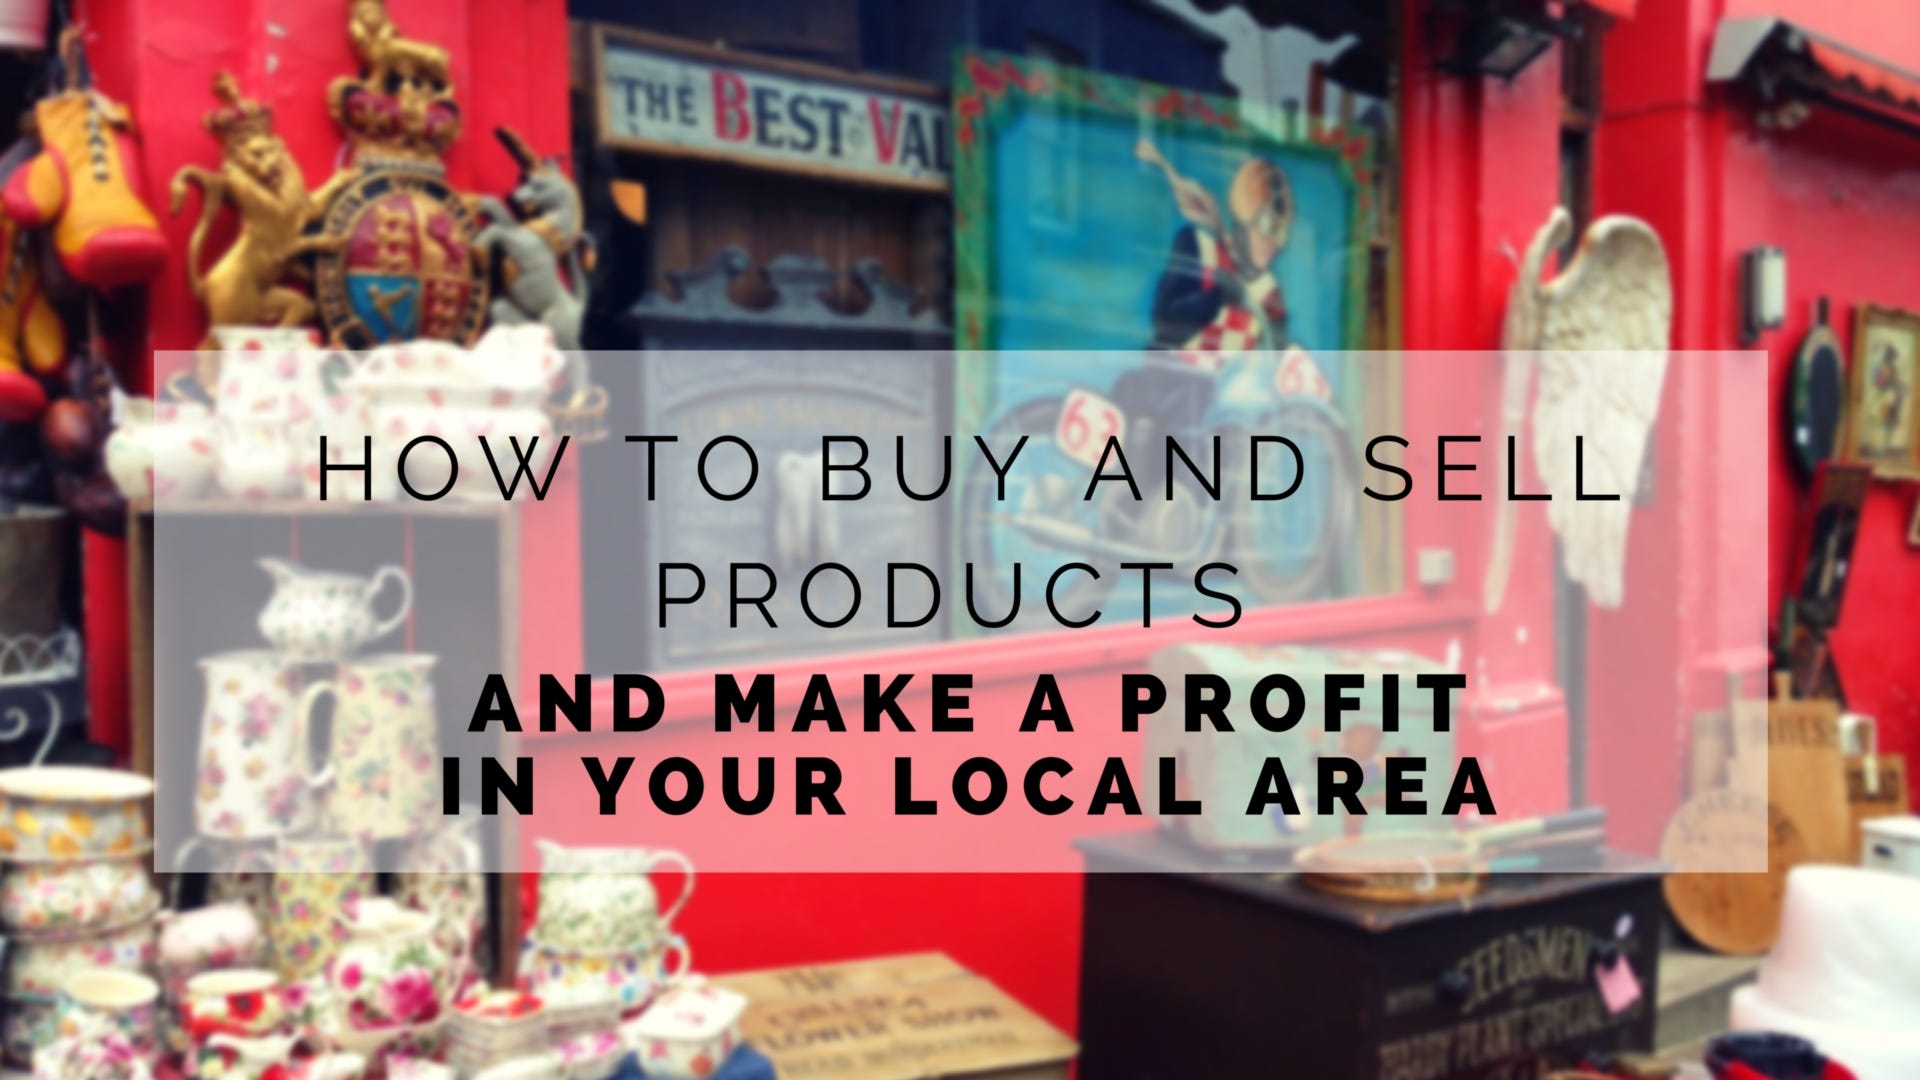 How To Buy And Sell Products And Make A Profit In Your Local Area By Upyourincomeclub Medium